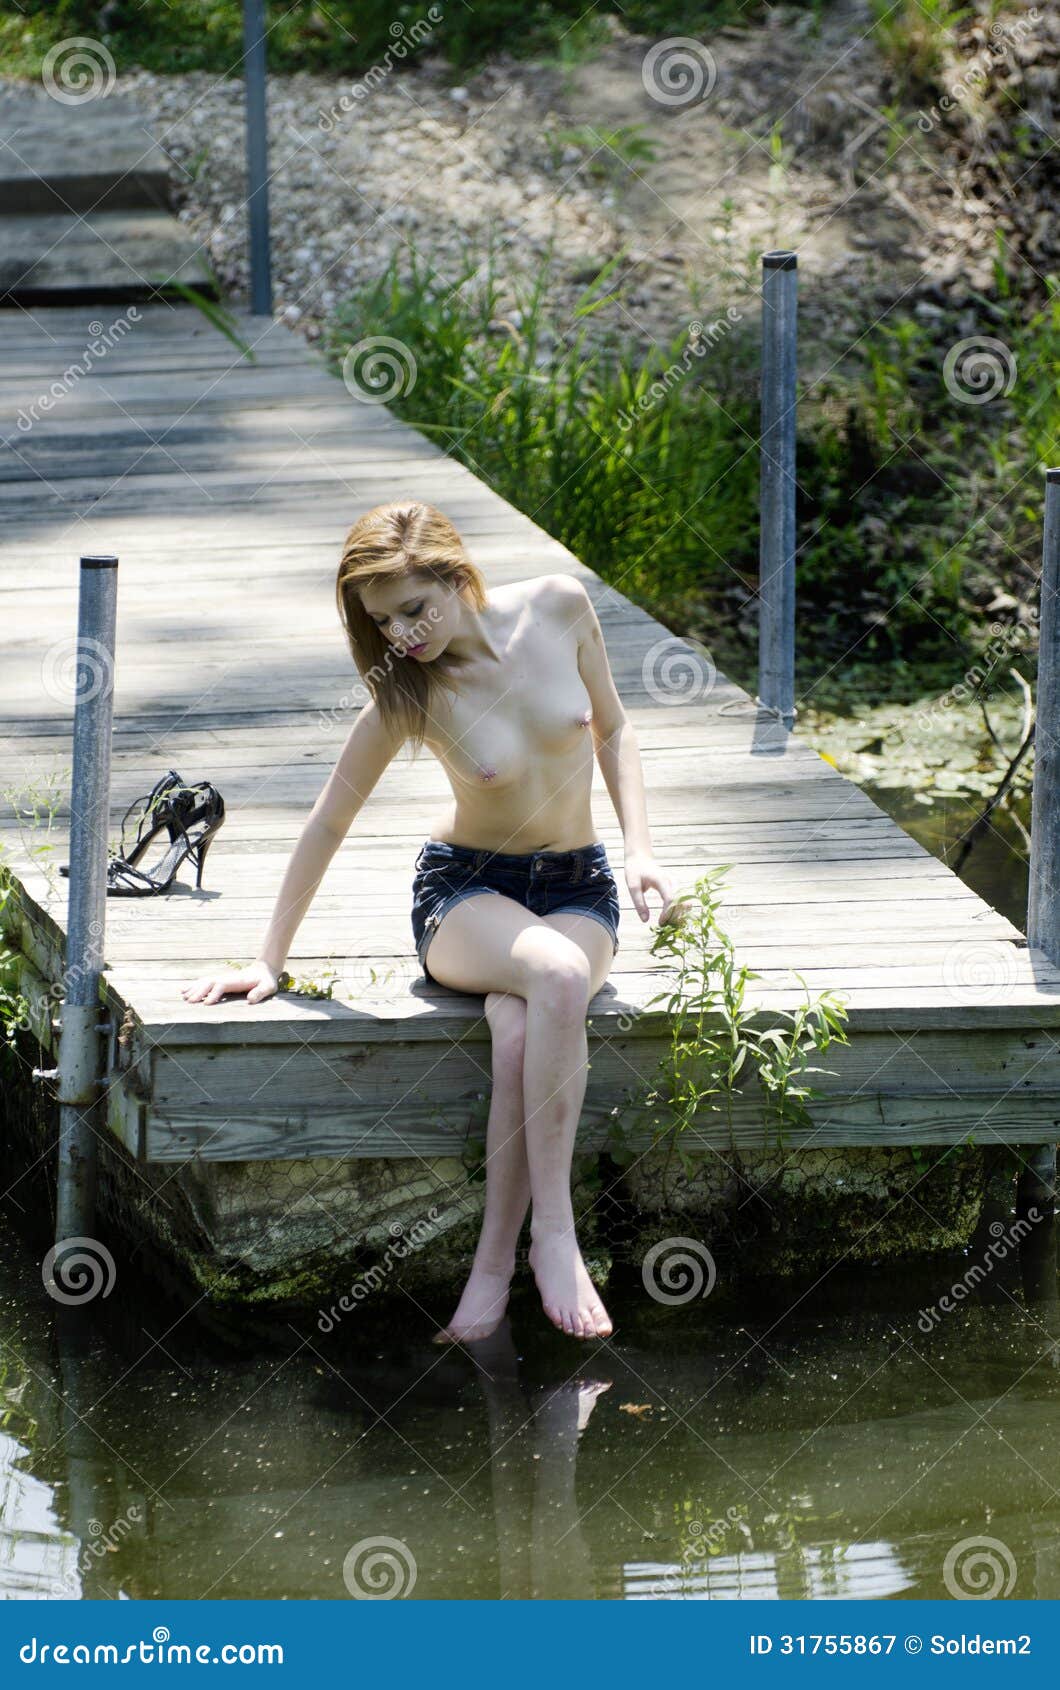 outdoor skinny dipping women naked photo